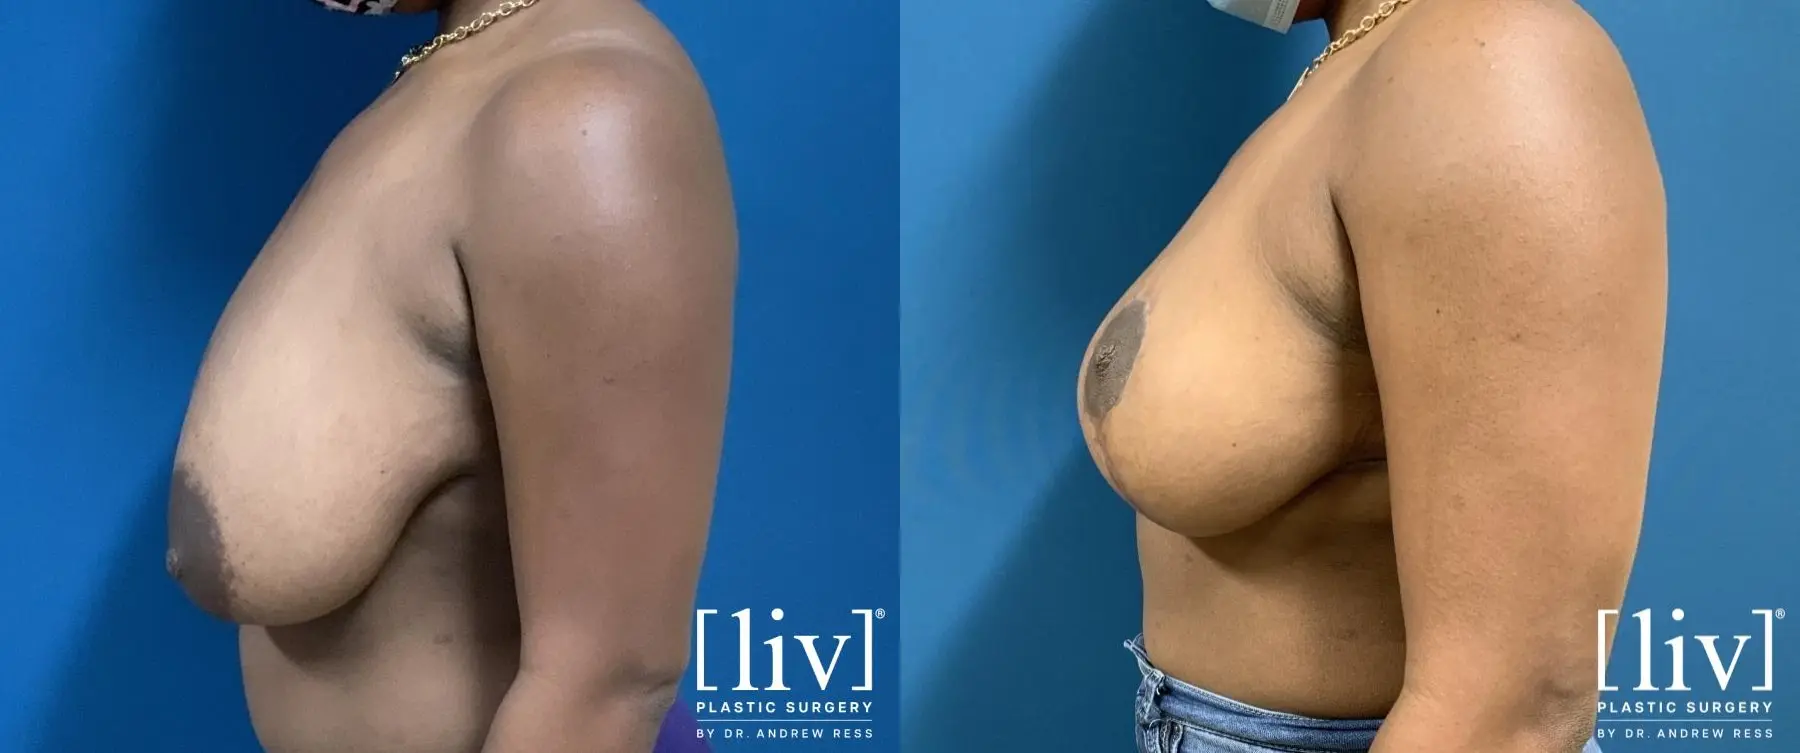 Breast Reduction: Patient 2 - Before and After 3